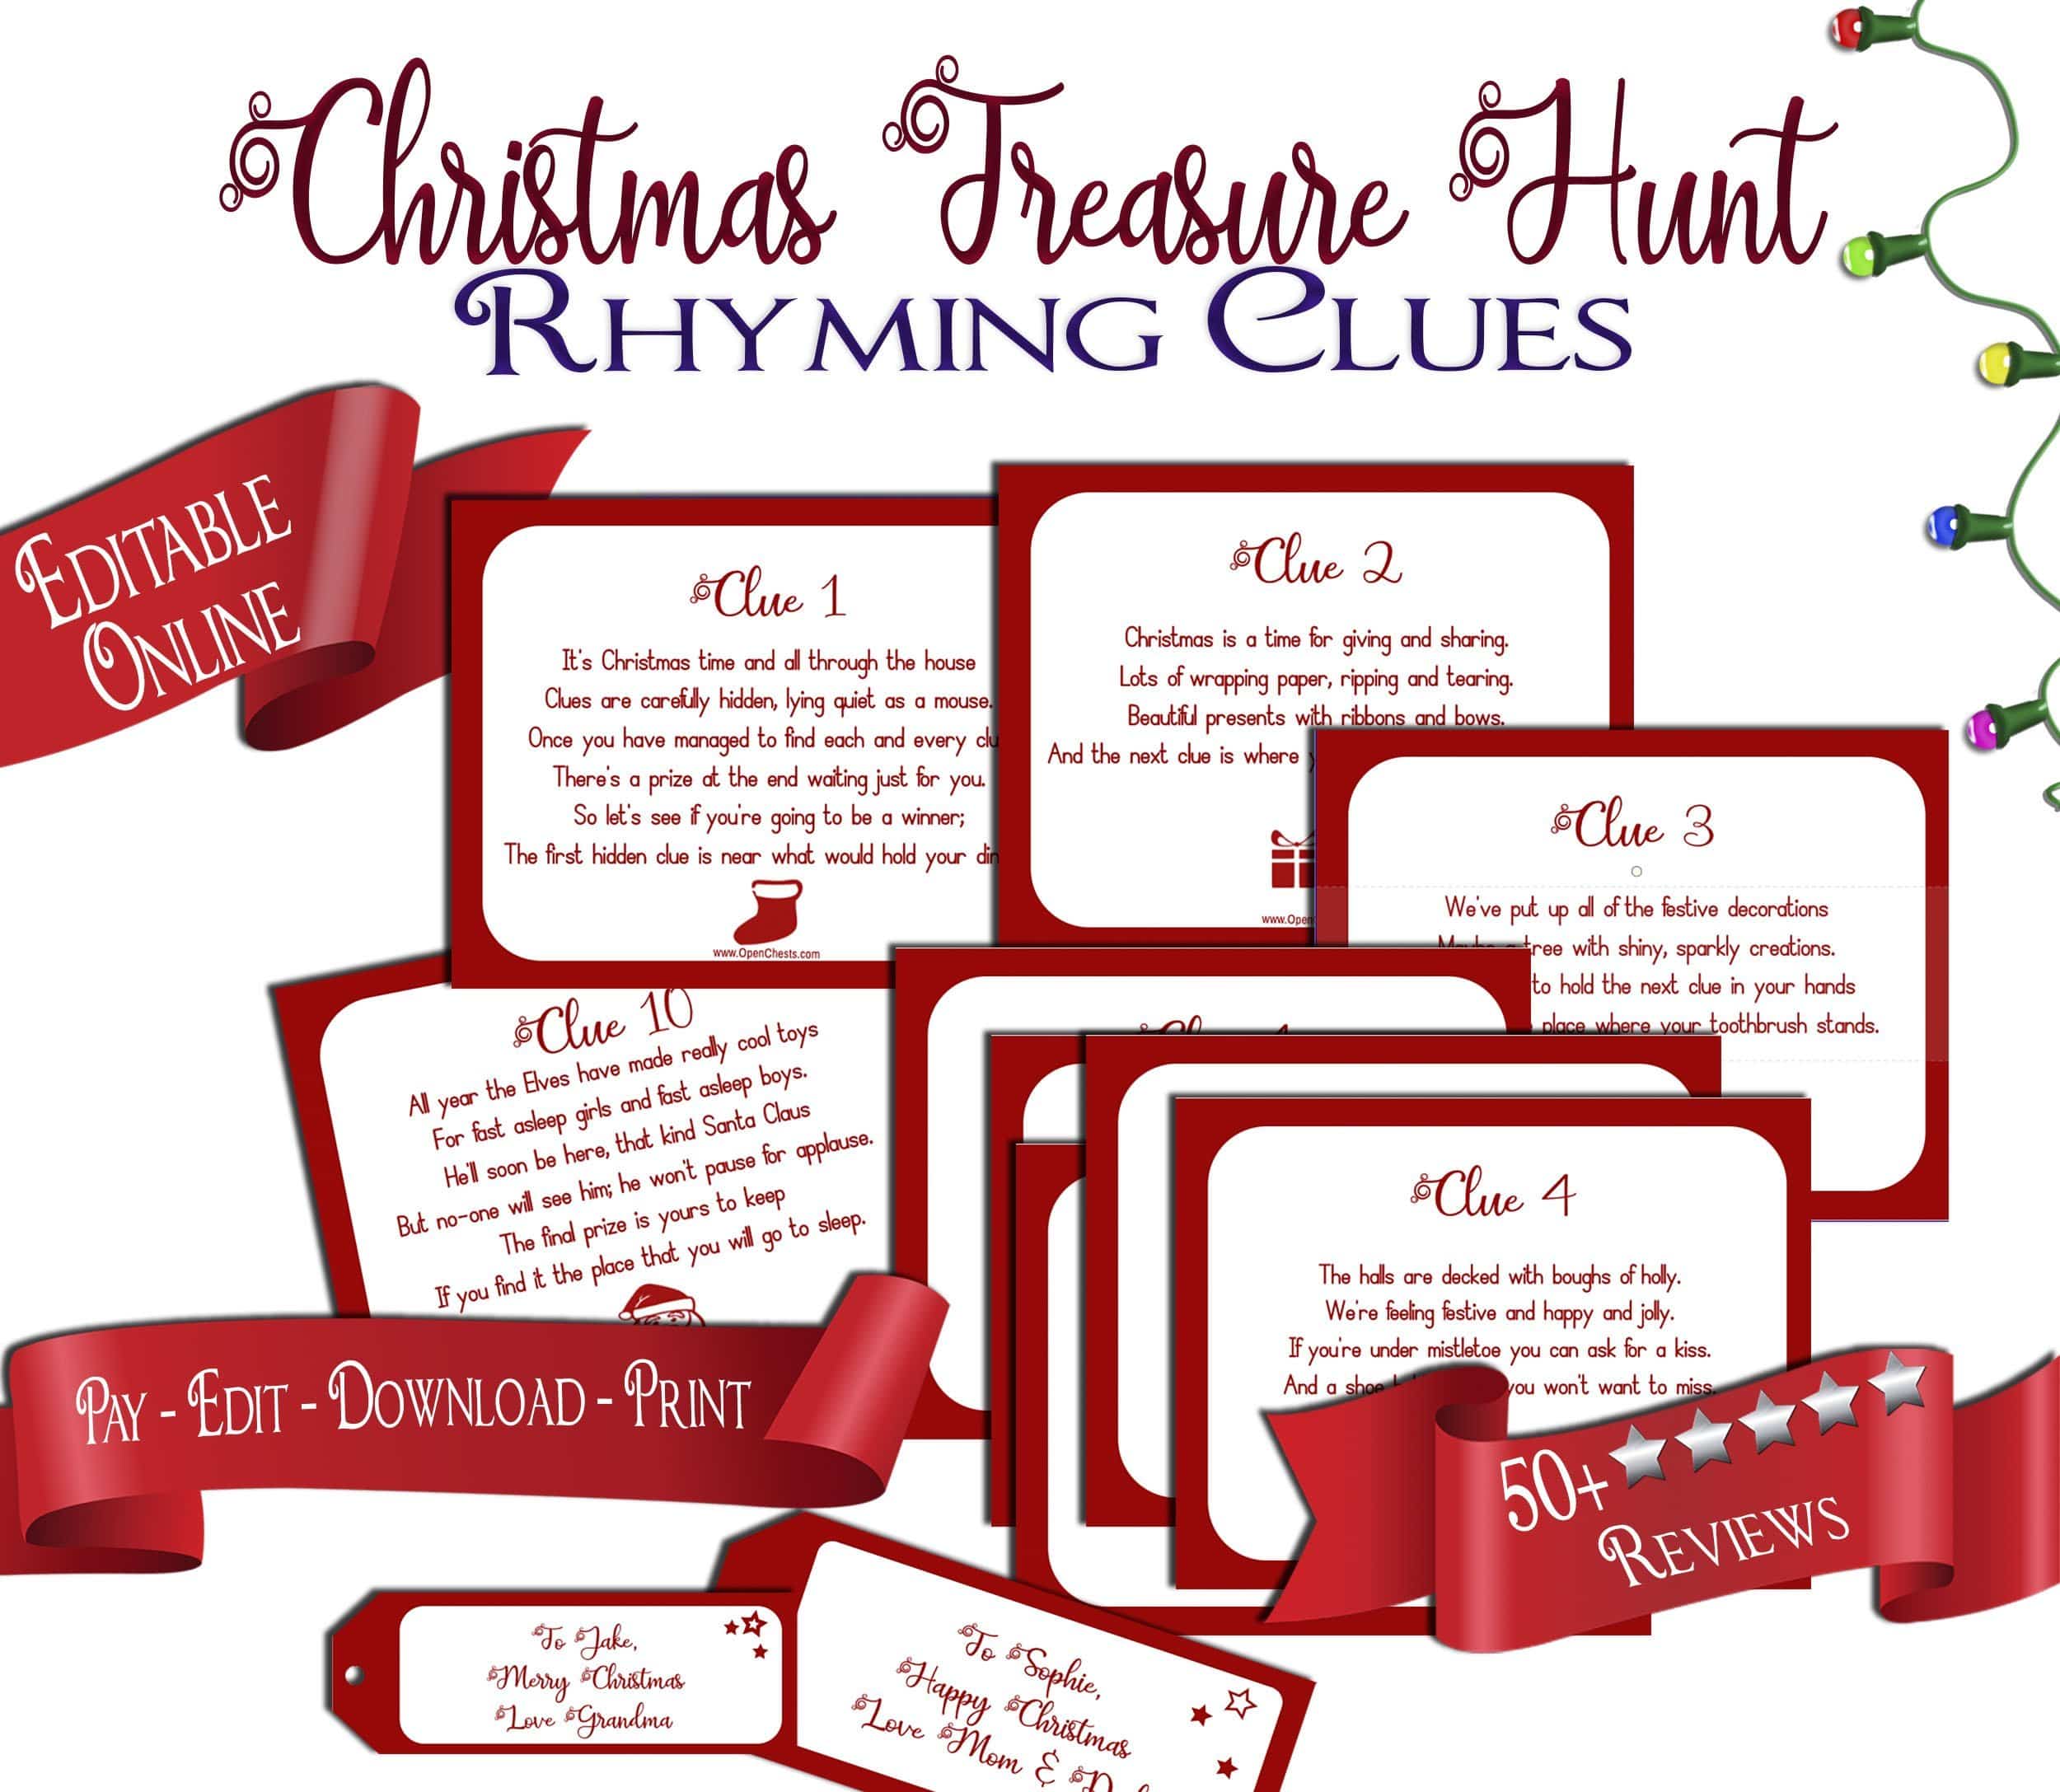 Indoor Christmas Treasure Hunt Clues Printable Scavenger Children Game Santa Claus Riddles- Instant Download PDF Eve morning day custom - Open Chests